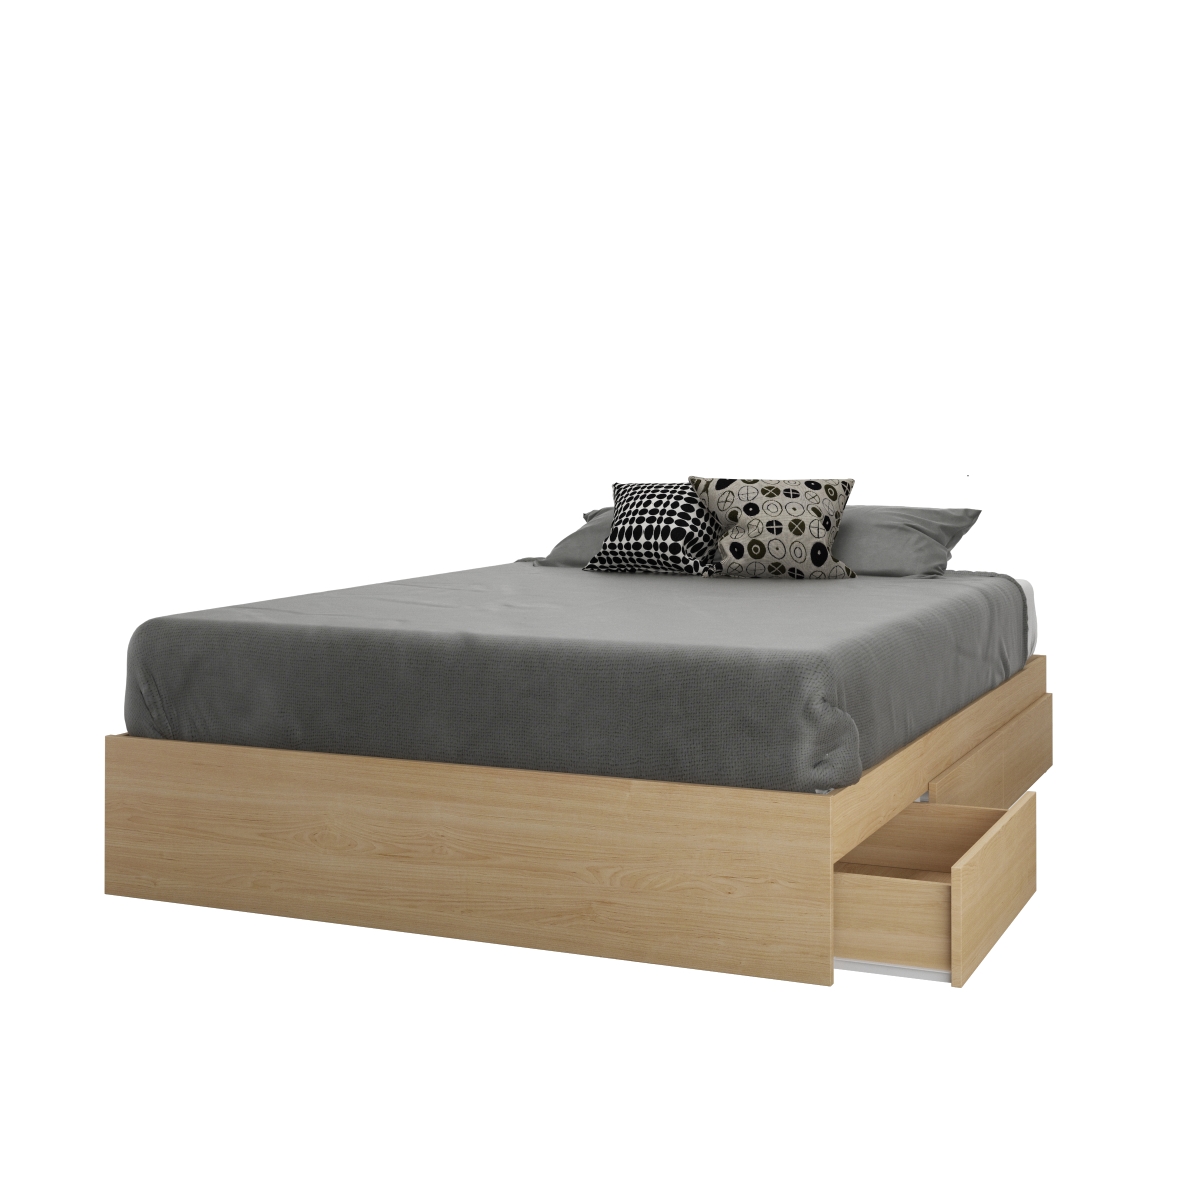 Nomad Bed Kit, Natural Maple Laminate & White Matte Lacquer - Full Size